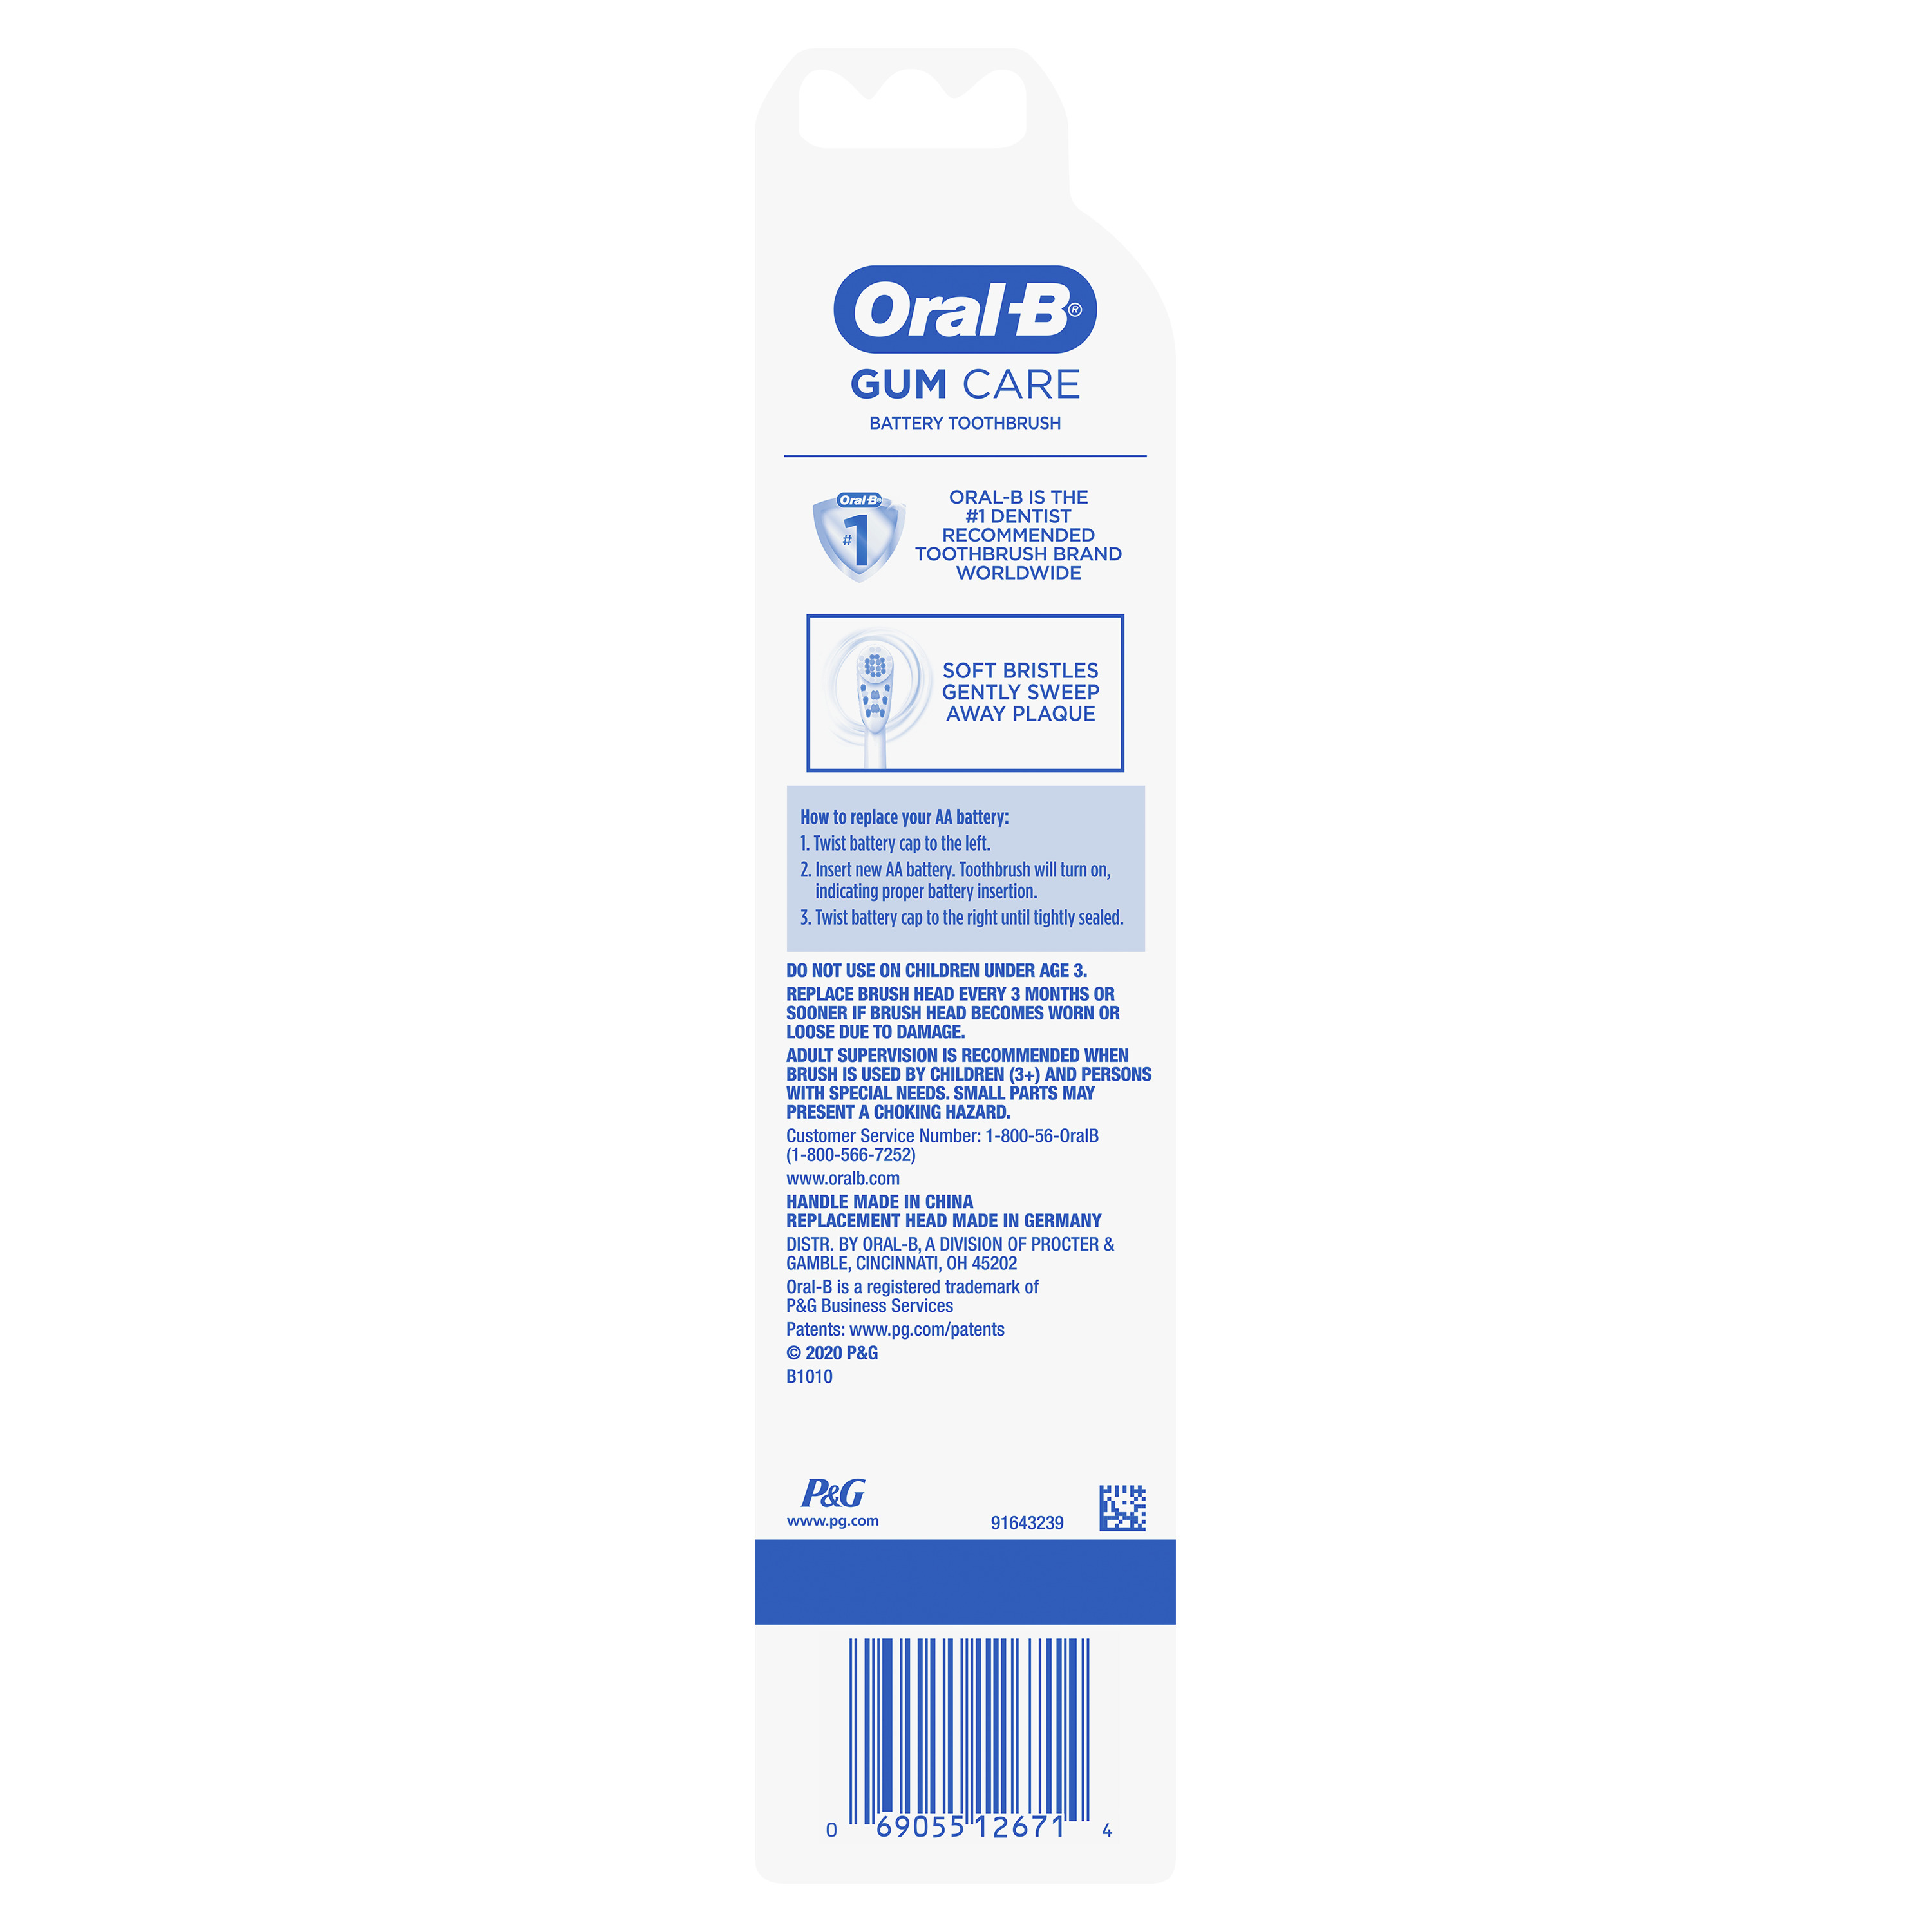 Oral-B Battery Powered Toothbrush Gum Care, 1 Count, Full Head, for Adults and Children 3+ - image 3 of 8